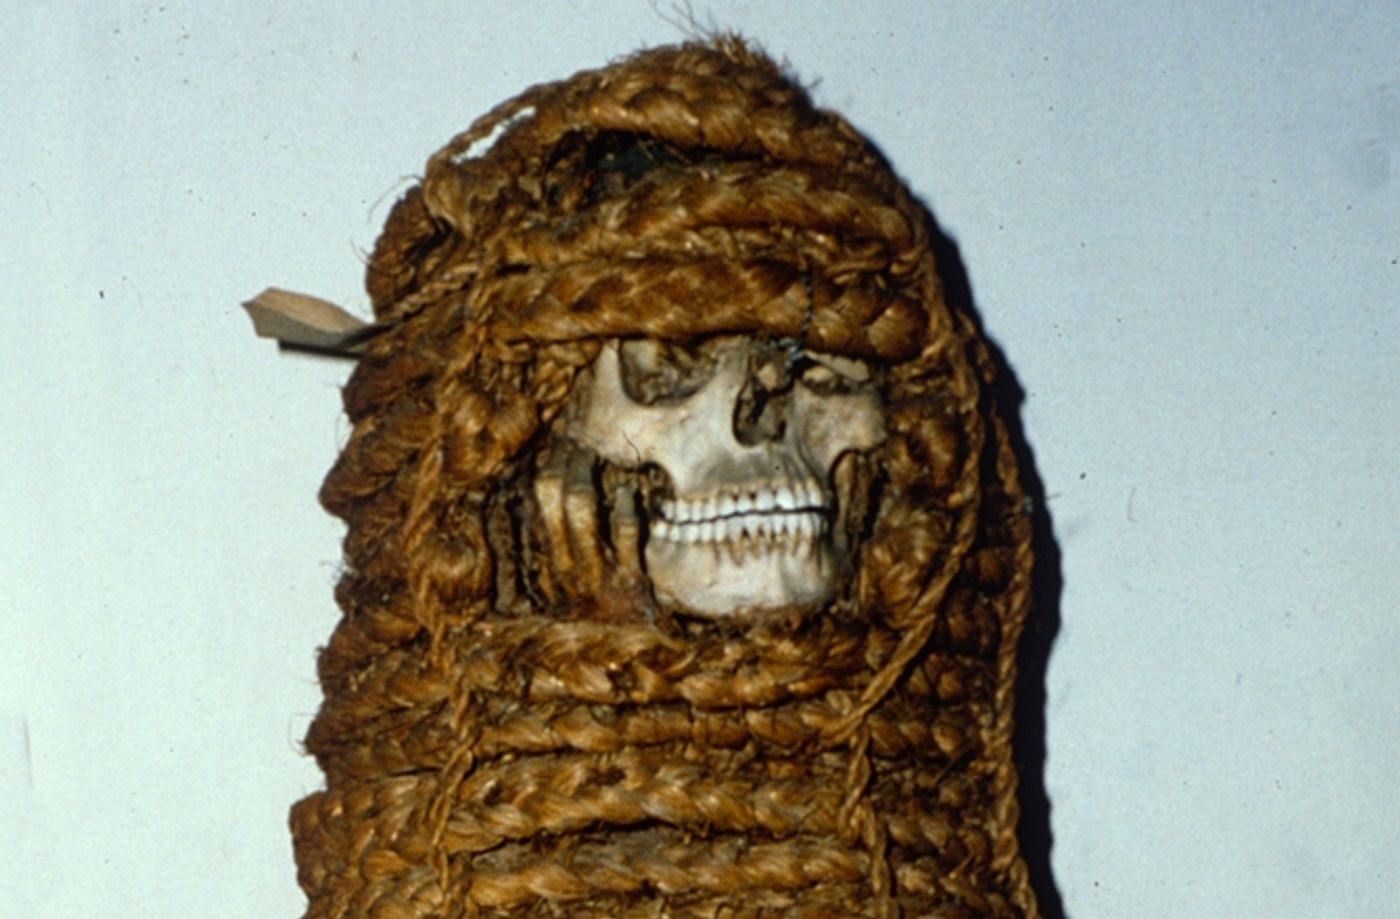 Researchers discovered antibiotic resistance genes in this mummy's microbiome.